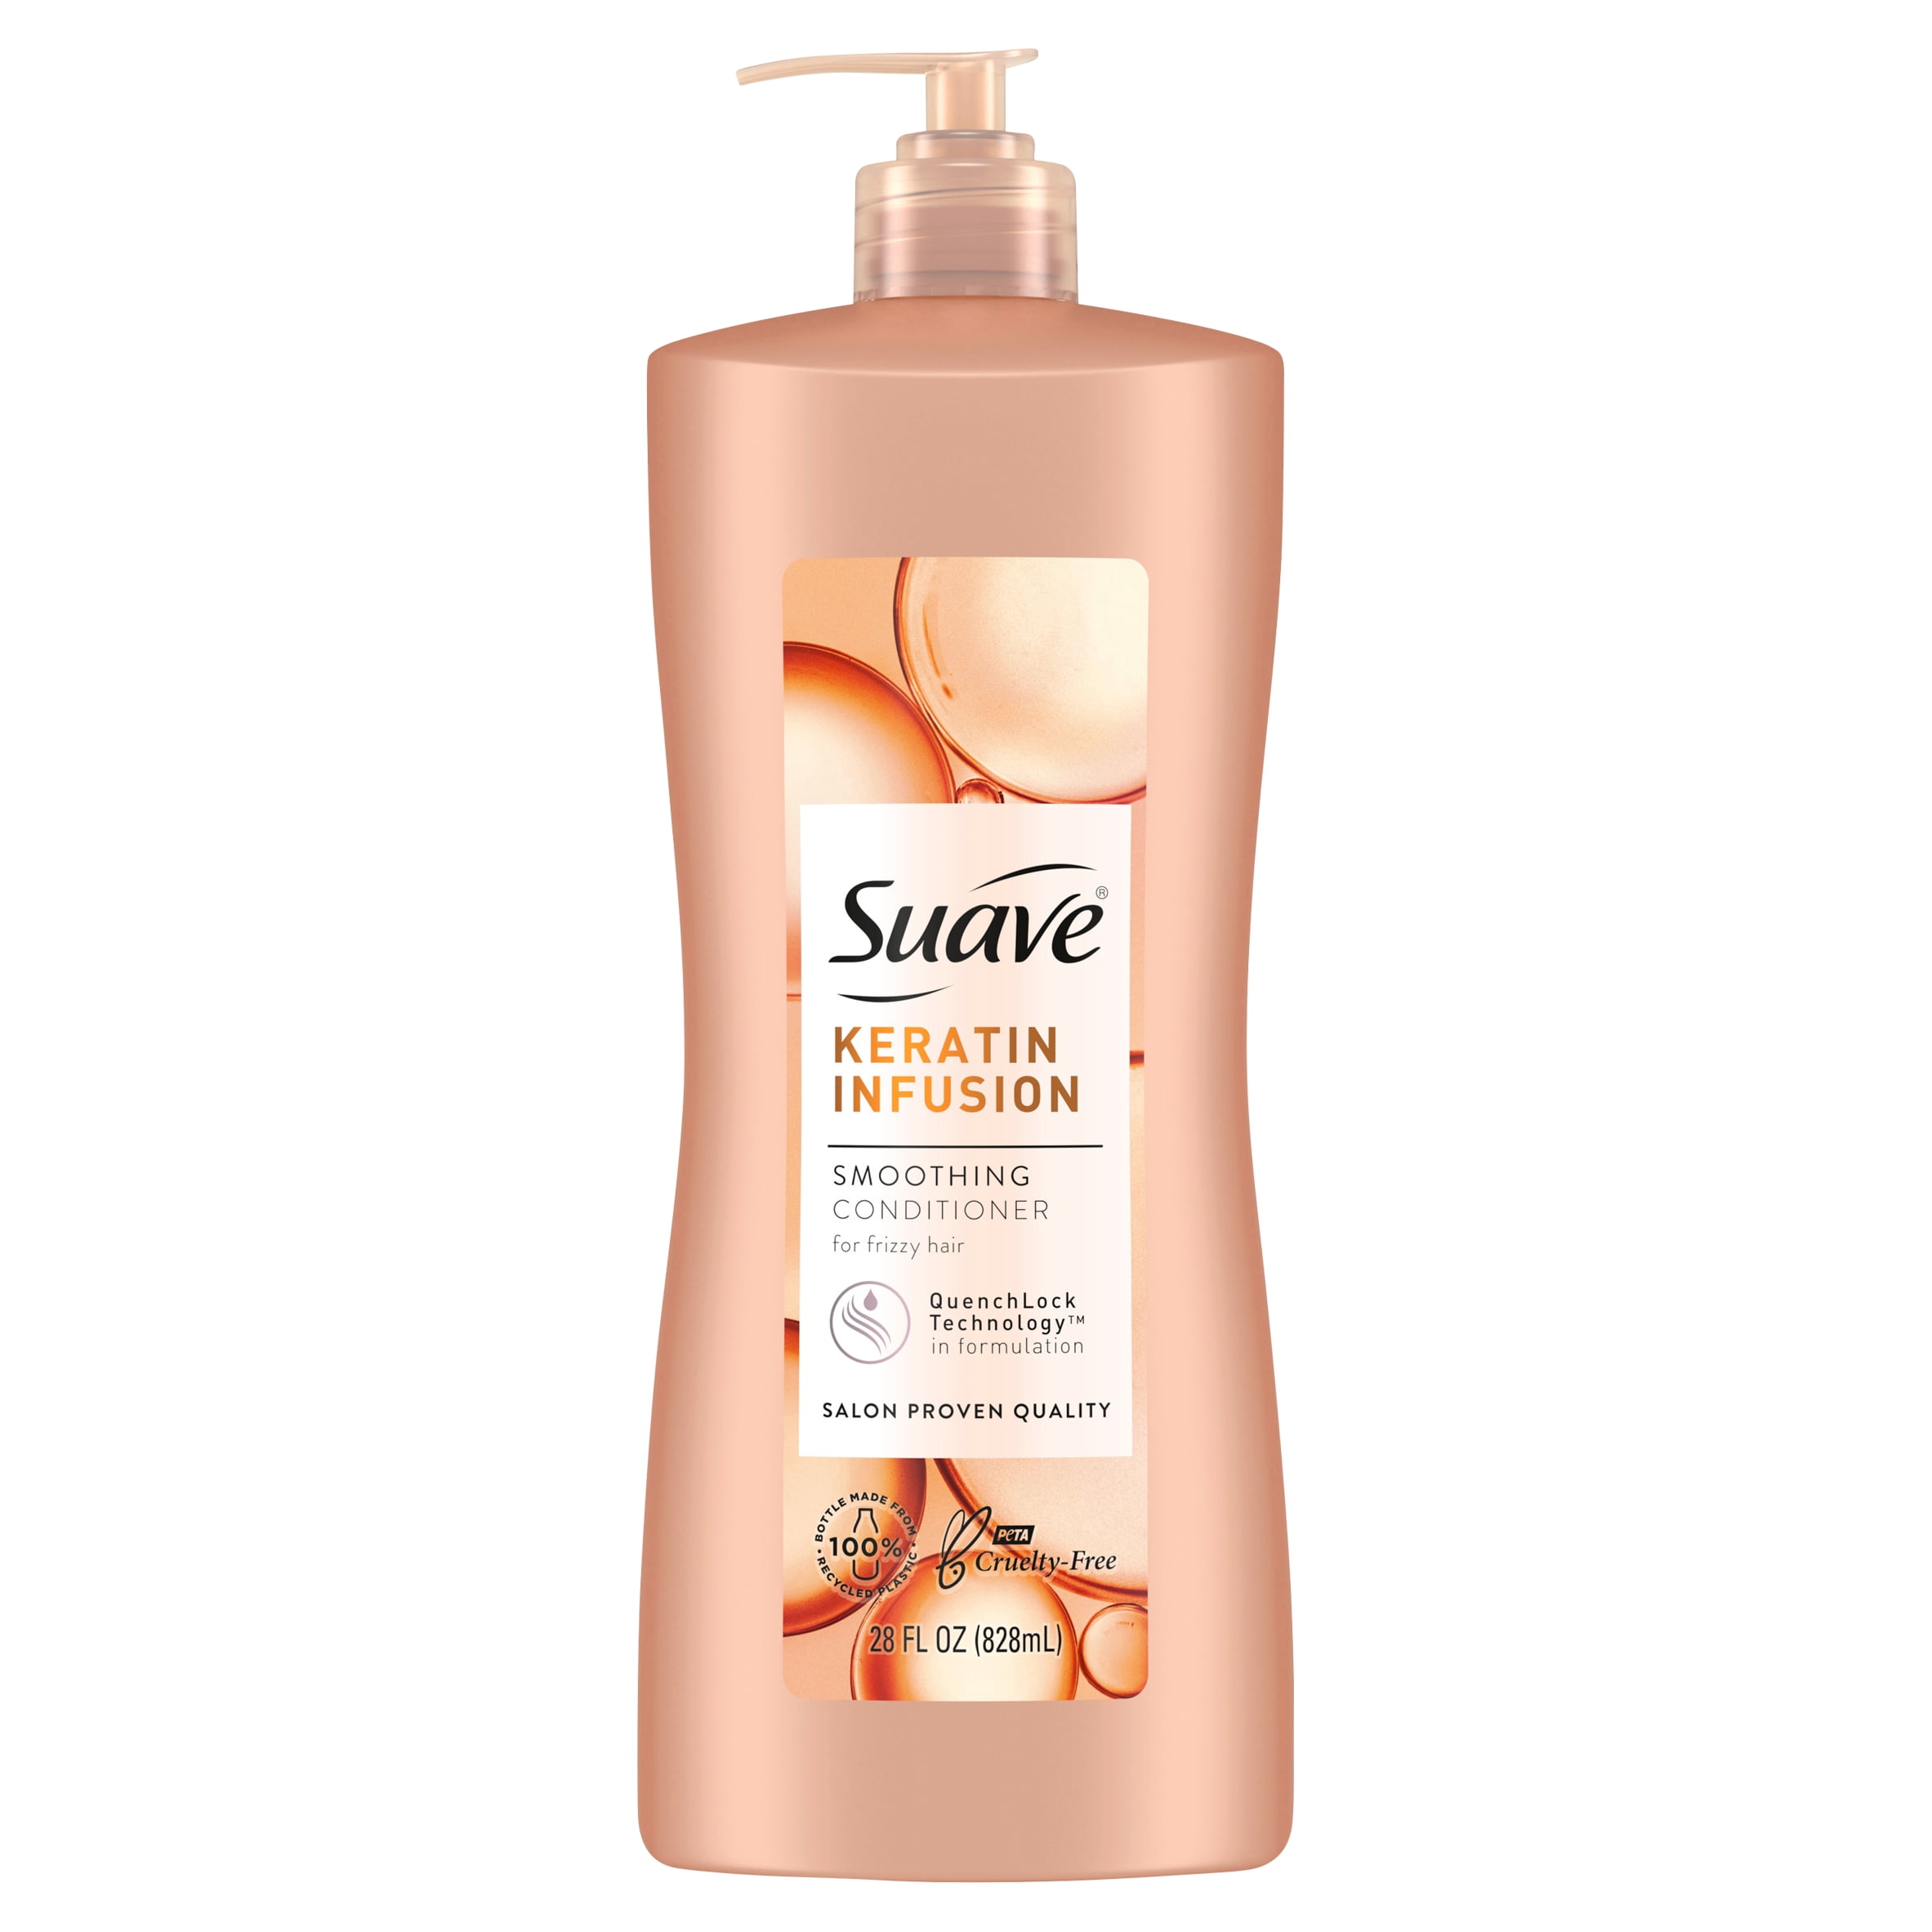 Suave Keratin Infusion Smoothing Conditioner for Frizzy Hair, 28 oz -  